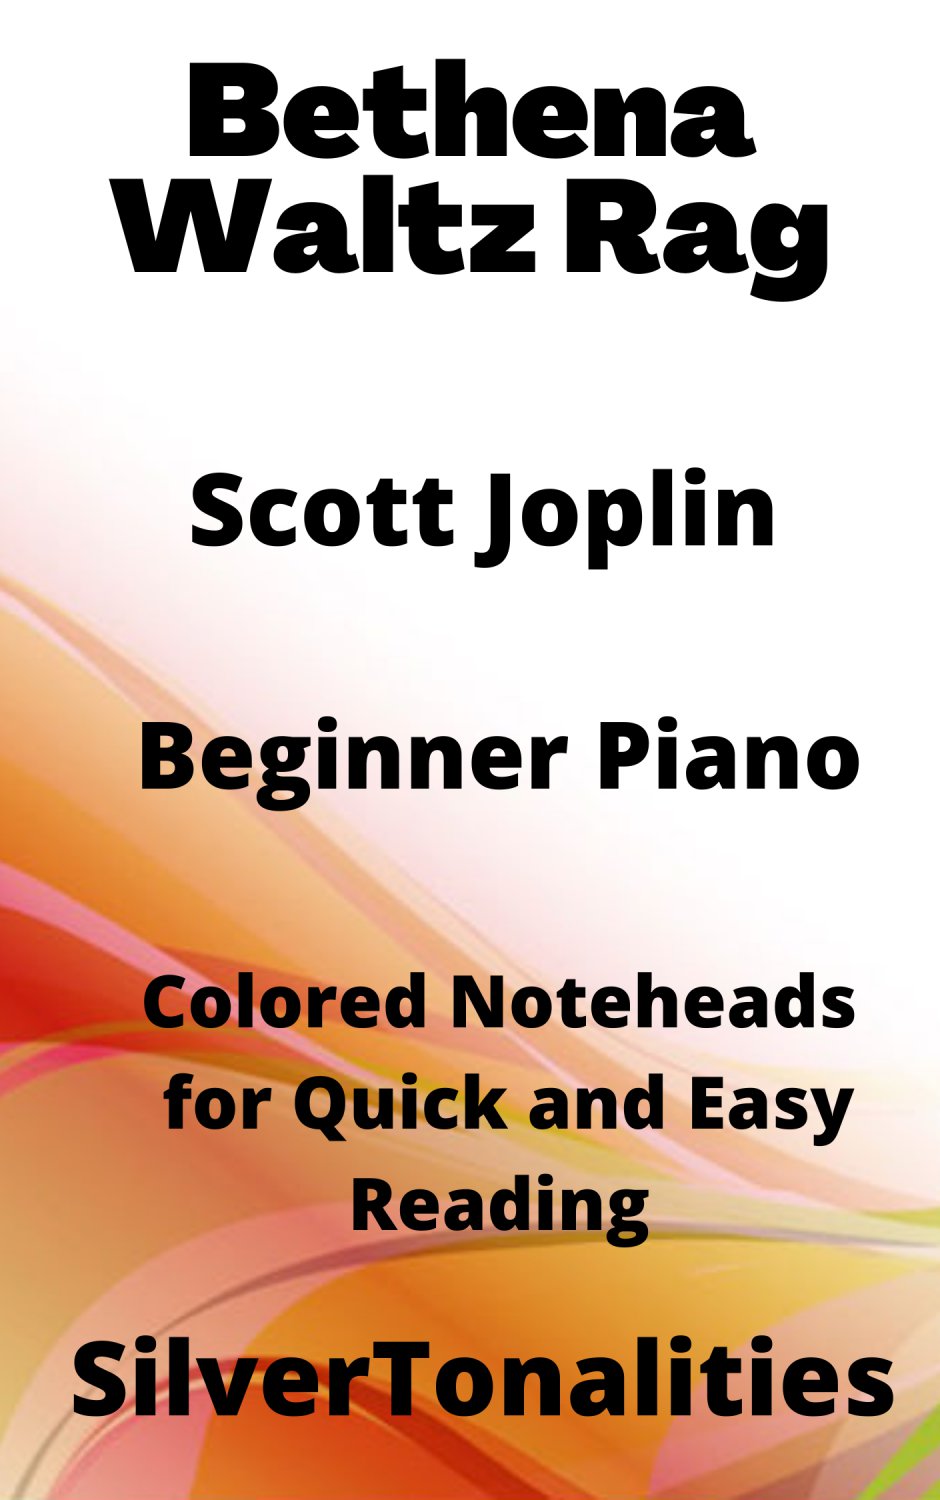 Bethena Waltz Rag Beginner Piano Sheet Music with Colored Notation